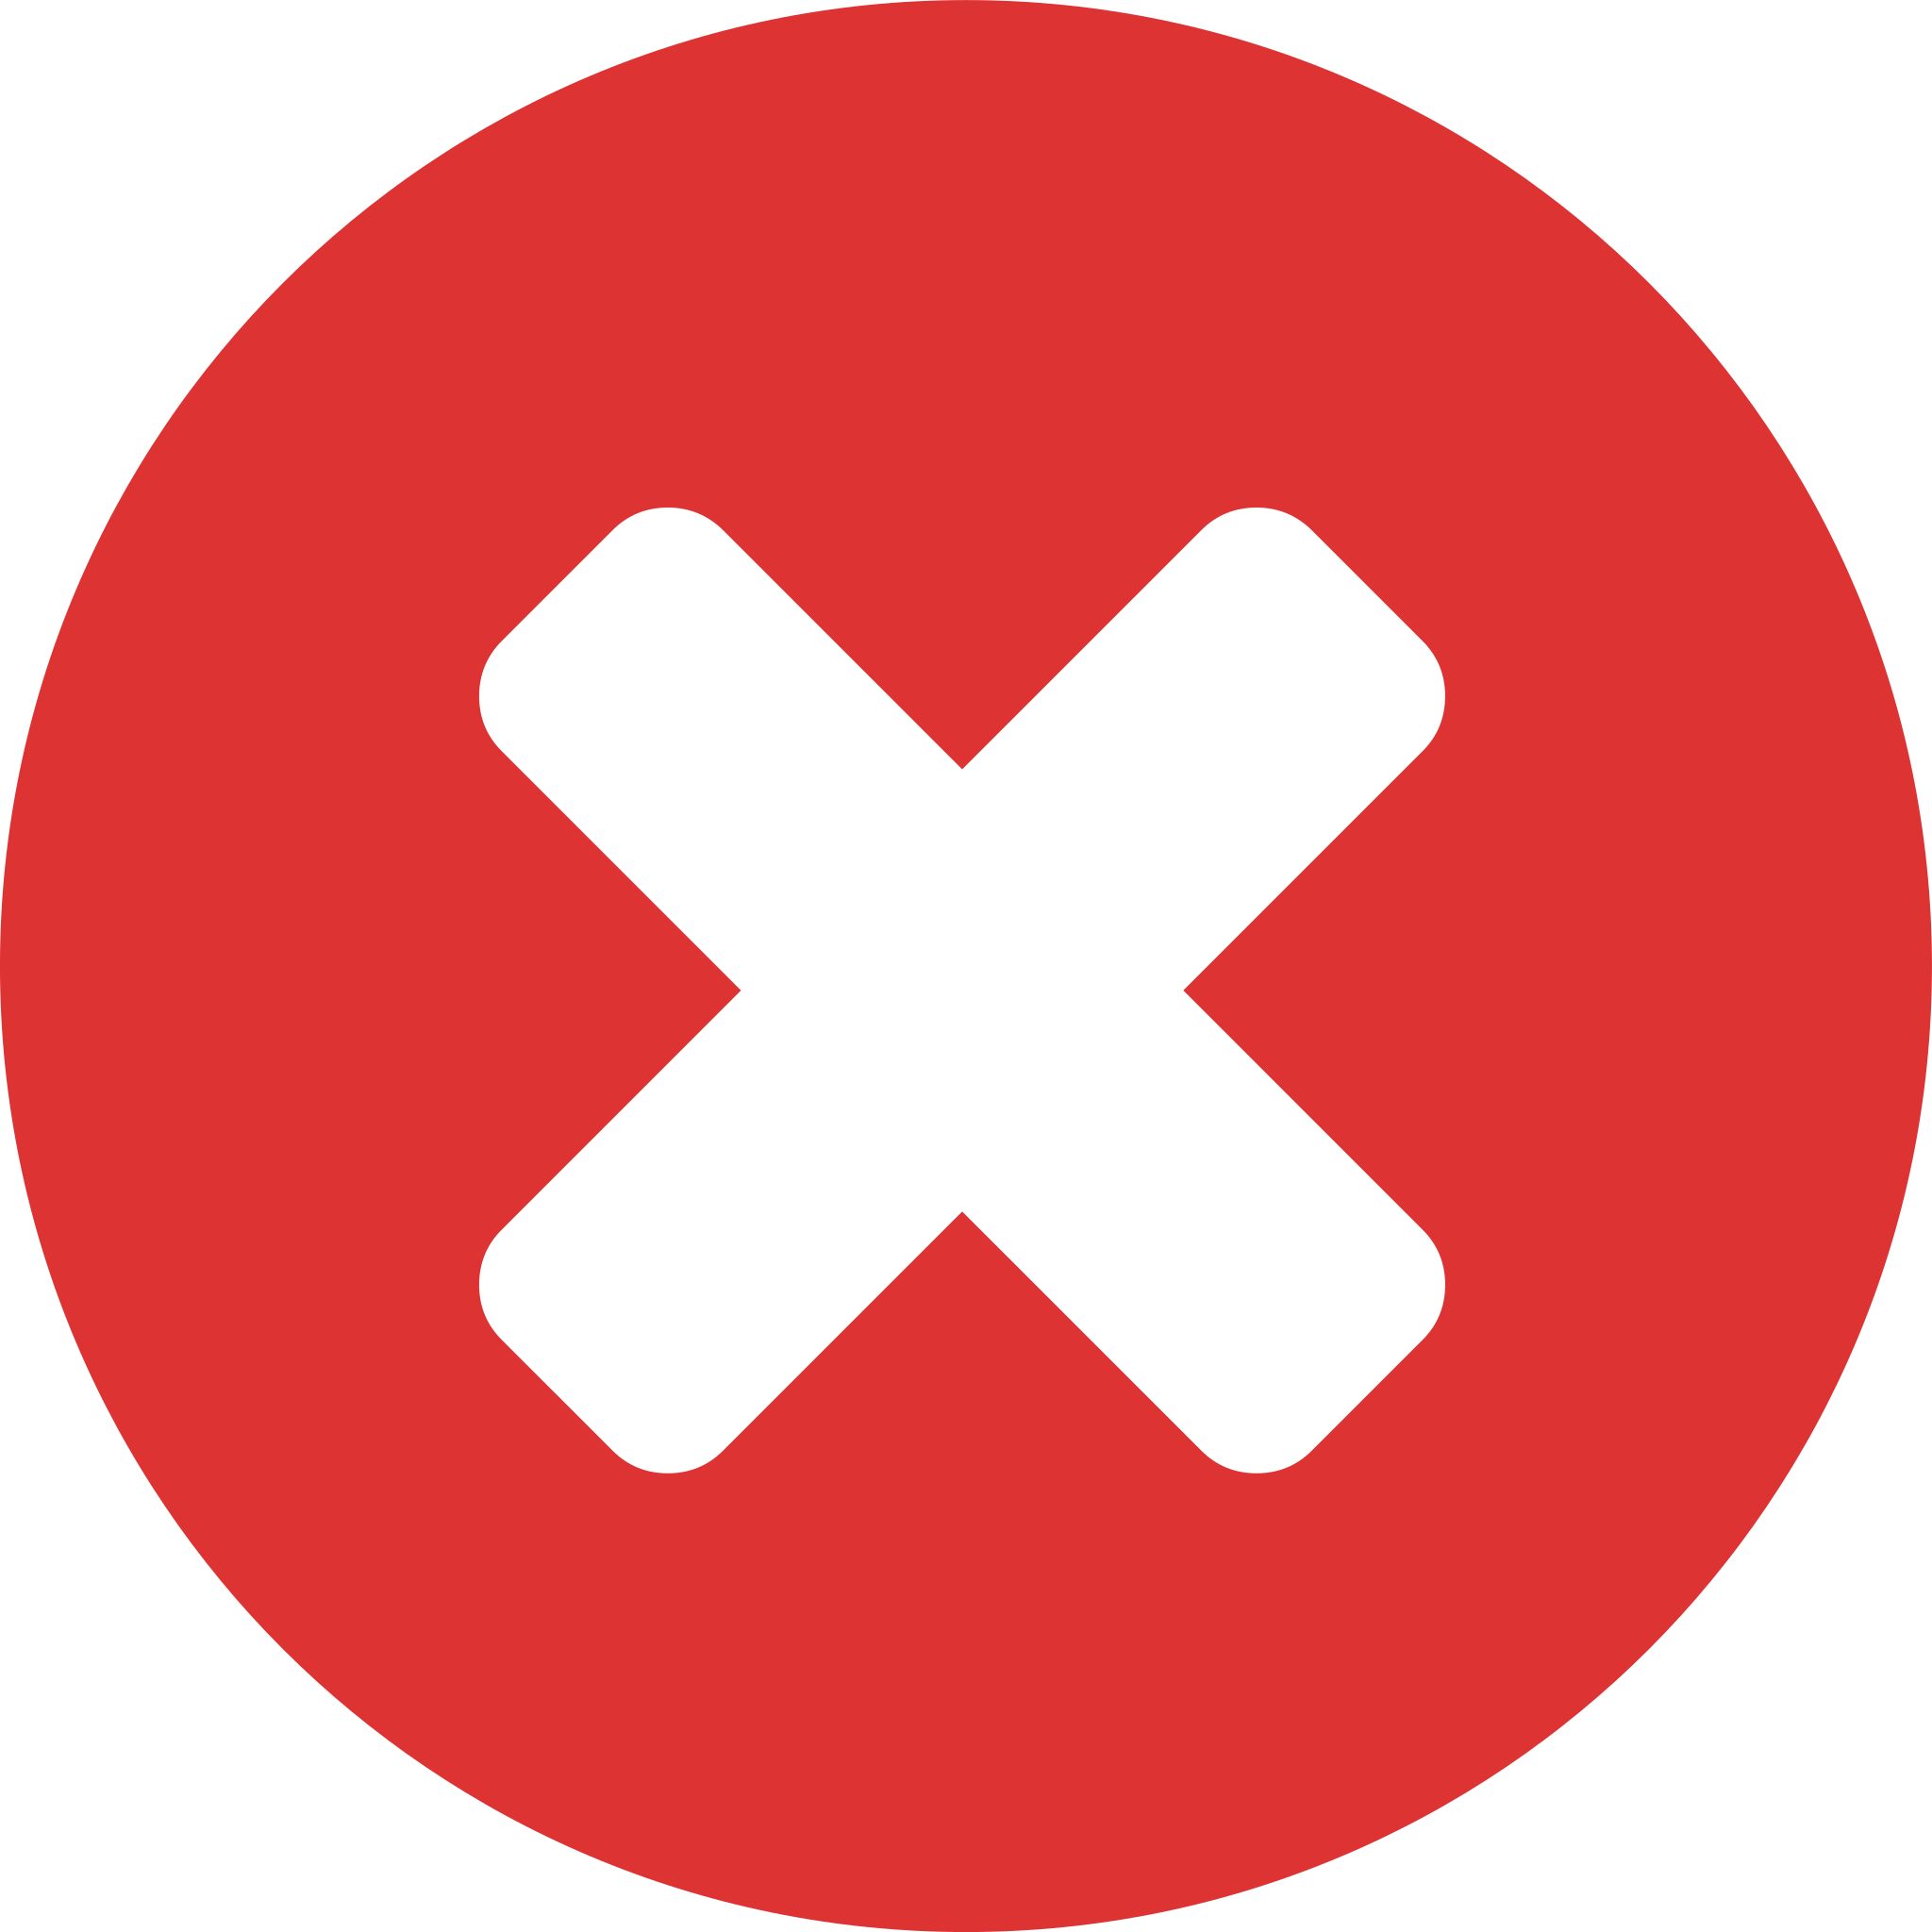 File:Red-x-mark-transparent-background-1-Transparent-Images.png - Wikimedia  Commons